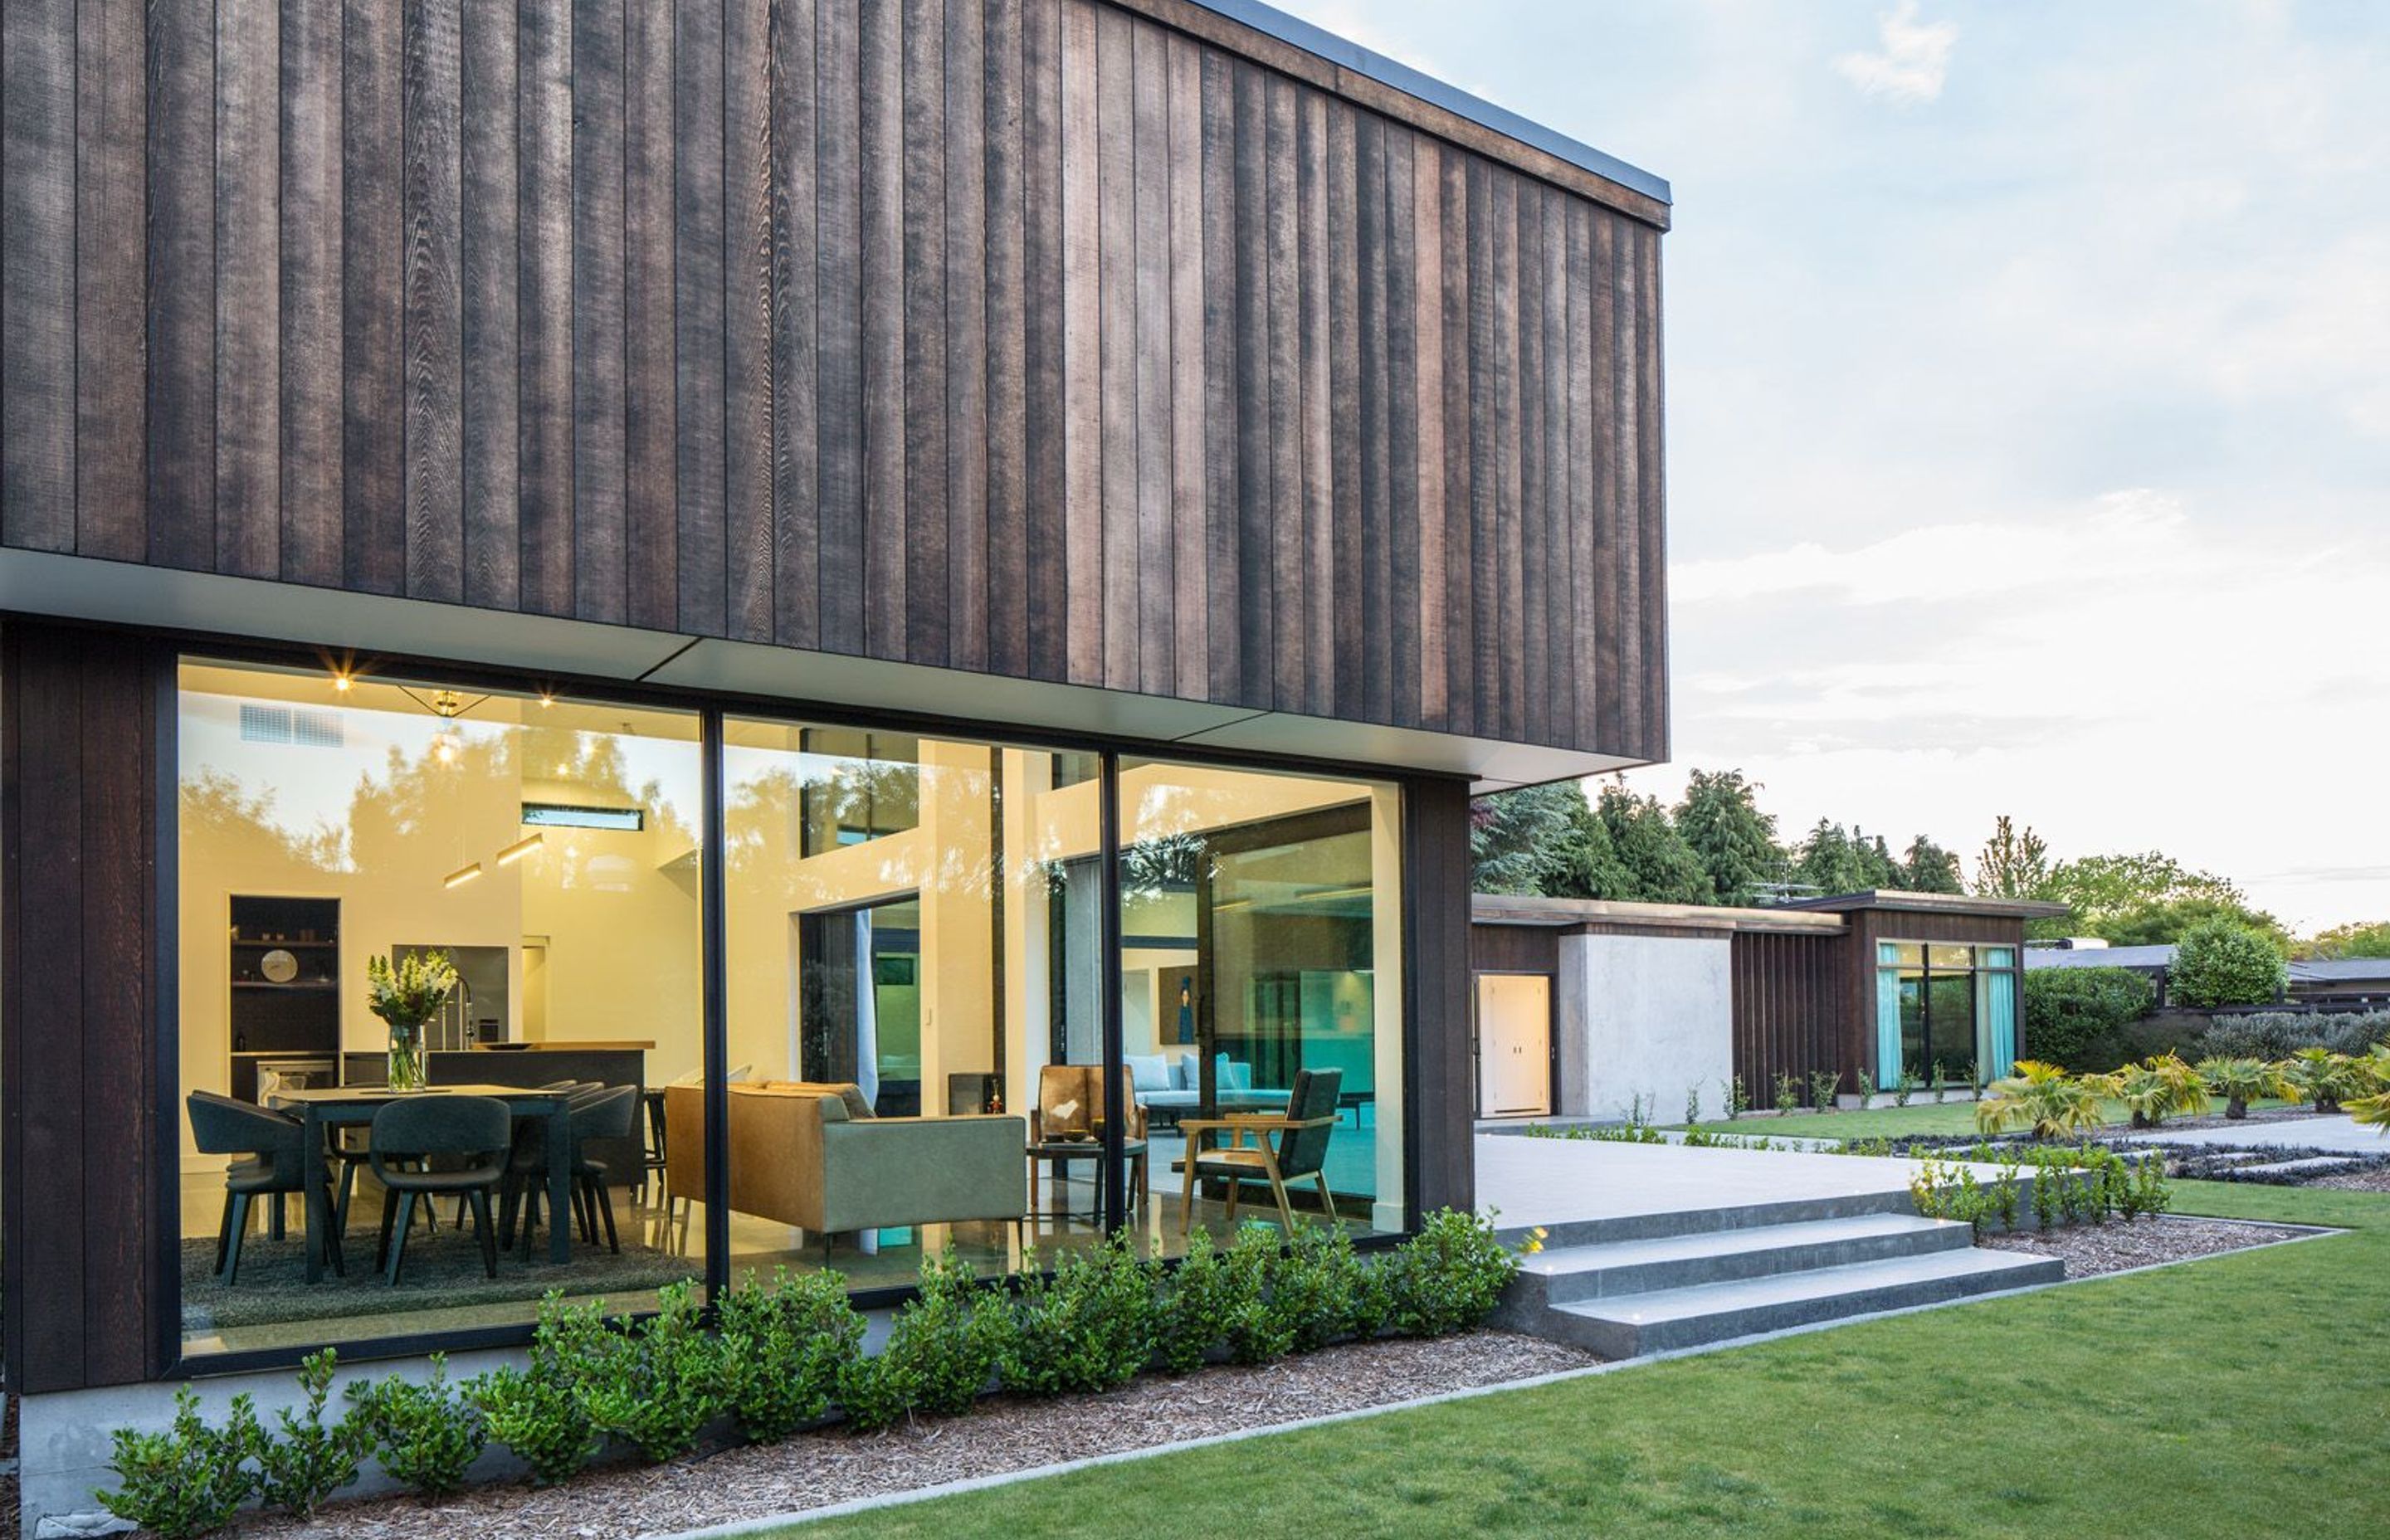 The homeowners wanted to incorporate a modern rustic feel into the exterior of the home and opted for cedar cladding with various levels of staining.